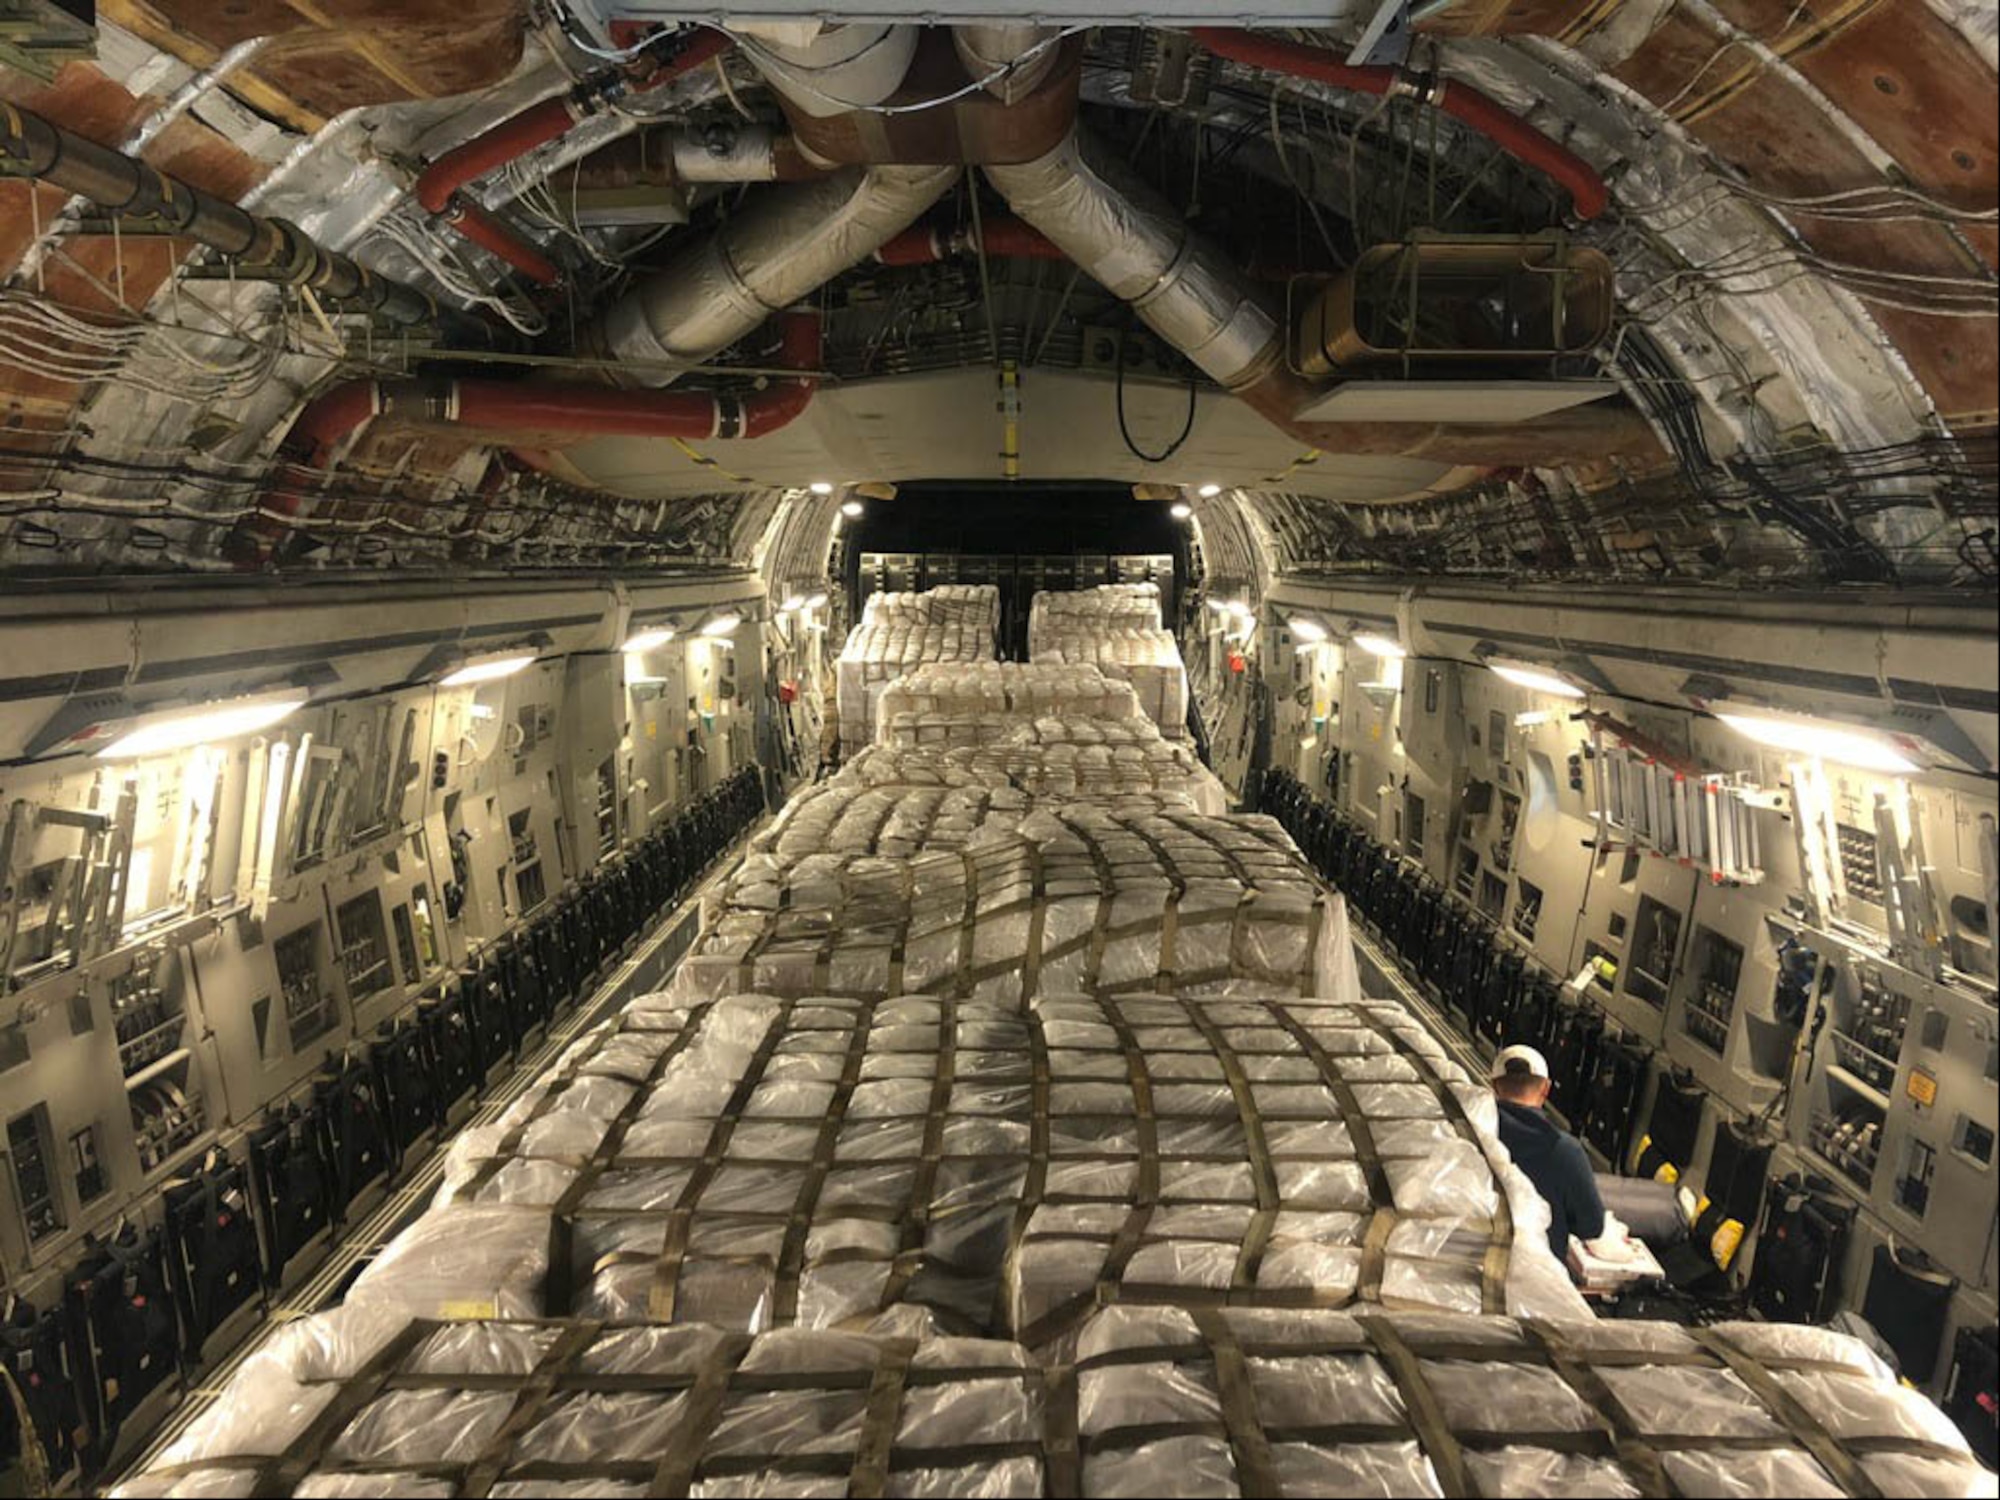 As part of a U.S. Department of Health and Human Services-led, whole-of-government effort, AMC transported a shipment of 13 pallets containing 500,000 COVID-19 sampling swabs aboard a 164th Airlift Wing C-17 Globemaster III from Aviano Air Base, Italy, to the Memphis, TN, Air National Guard Baser, March 17, 2020..